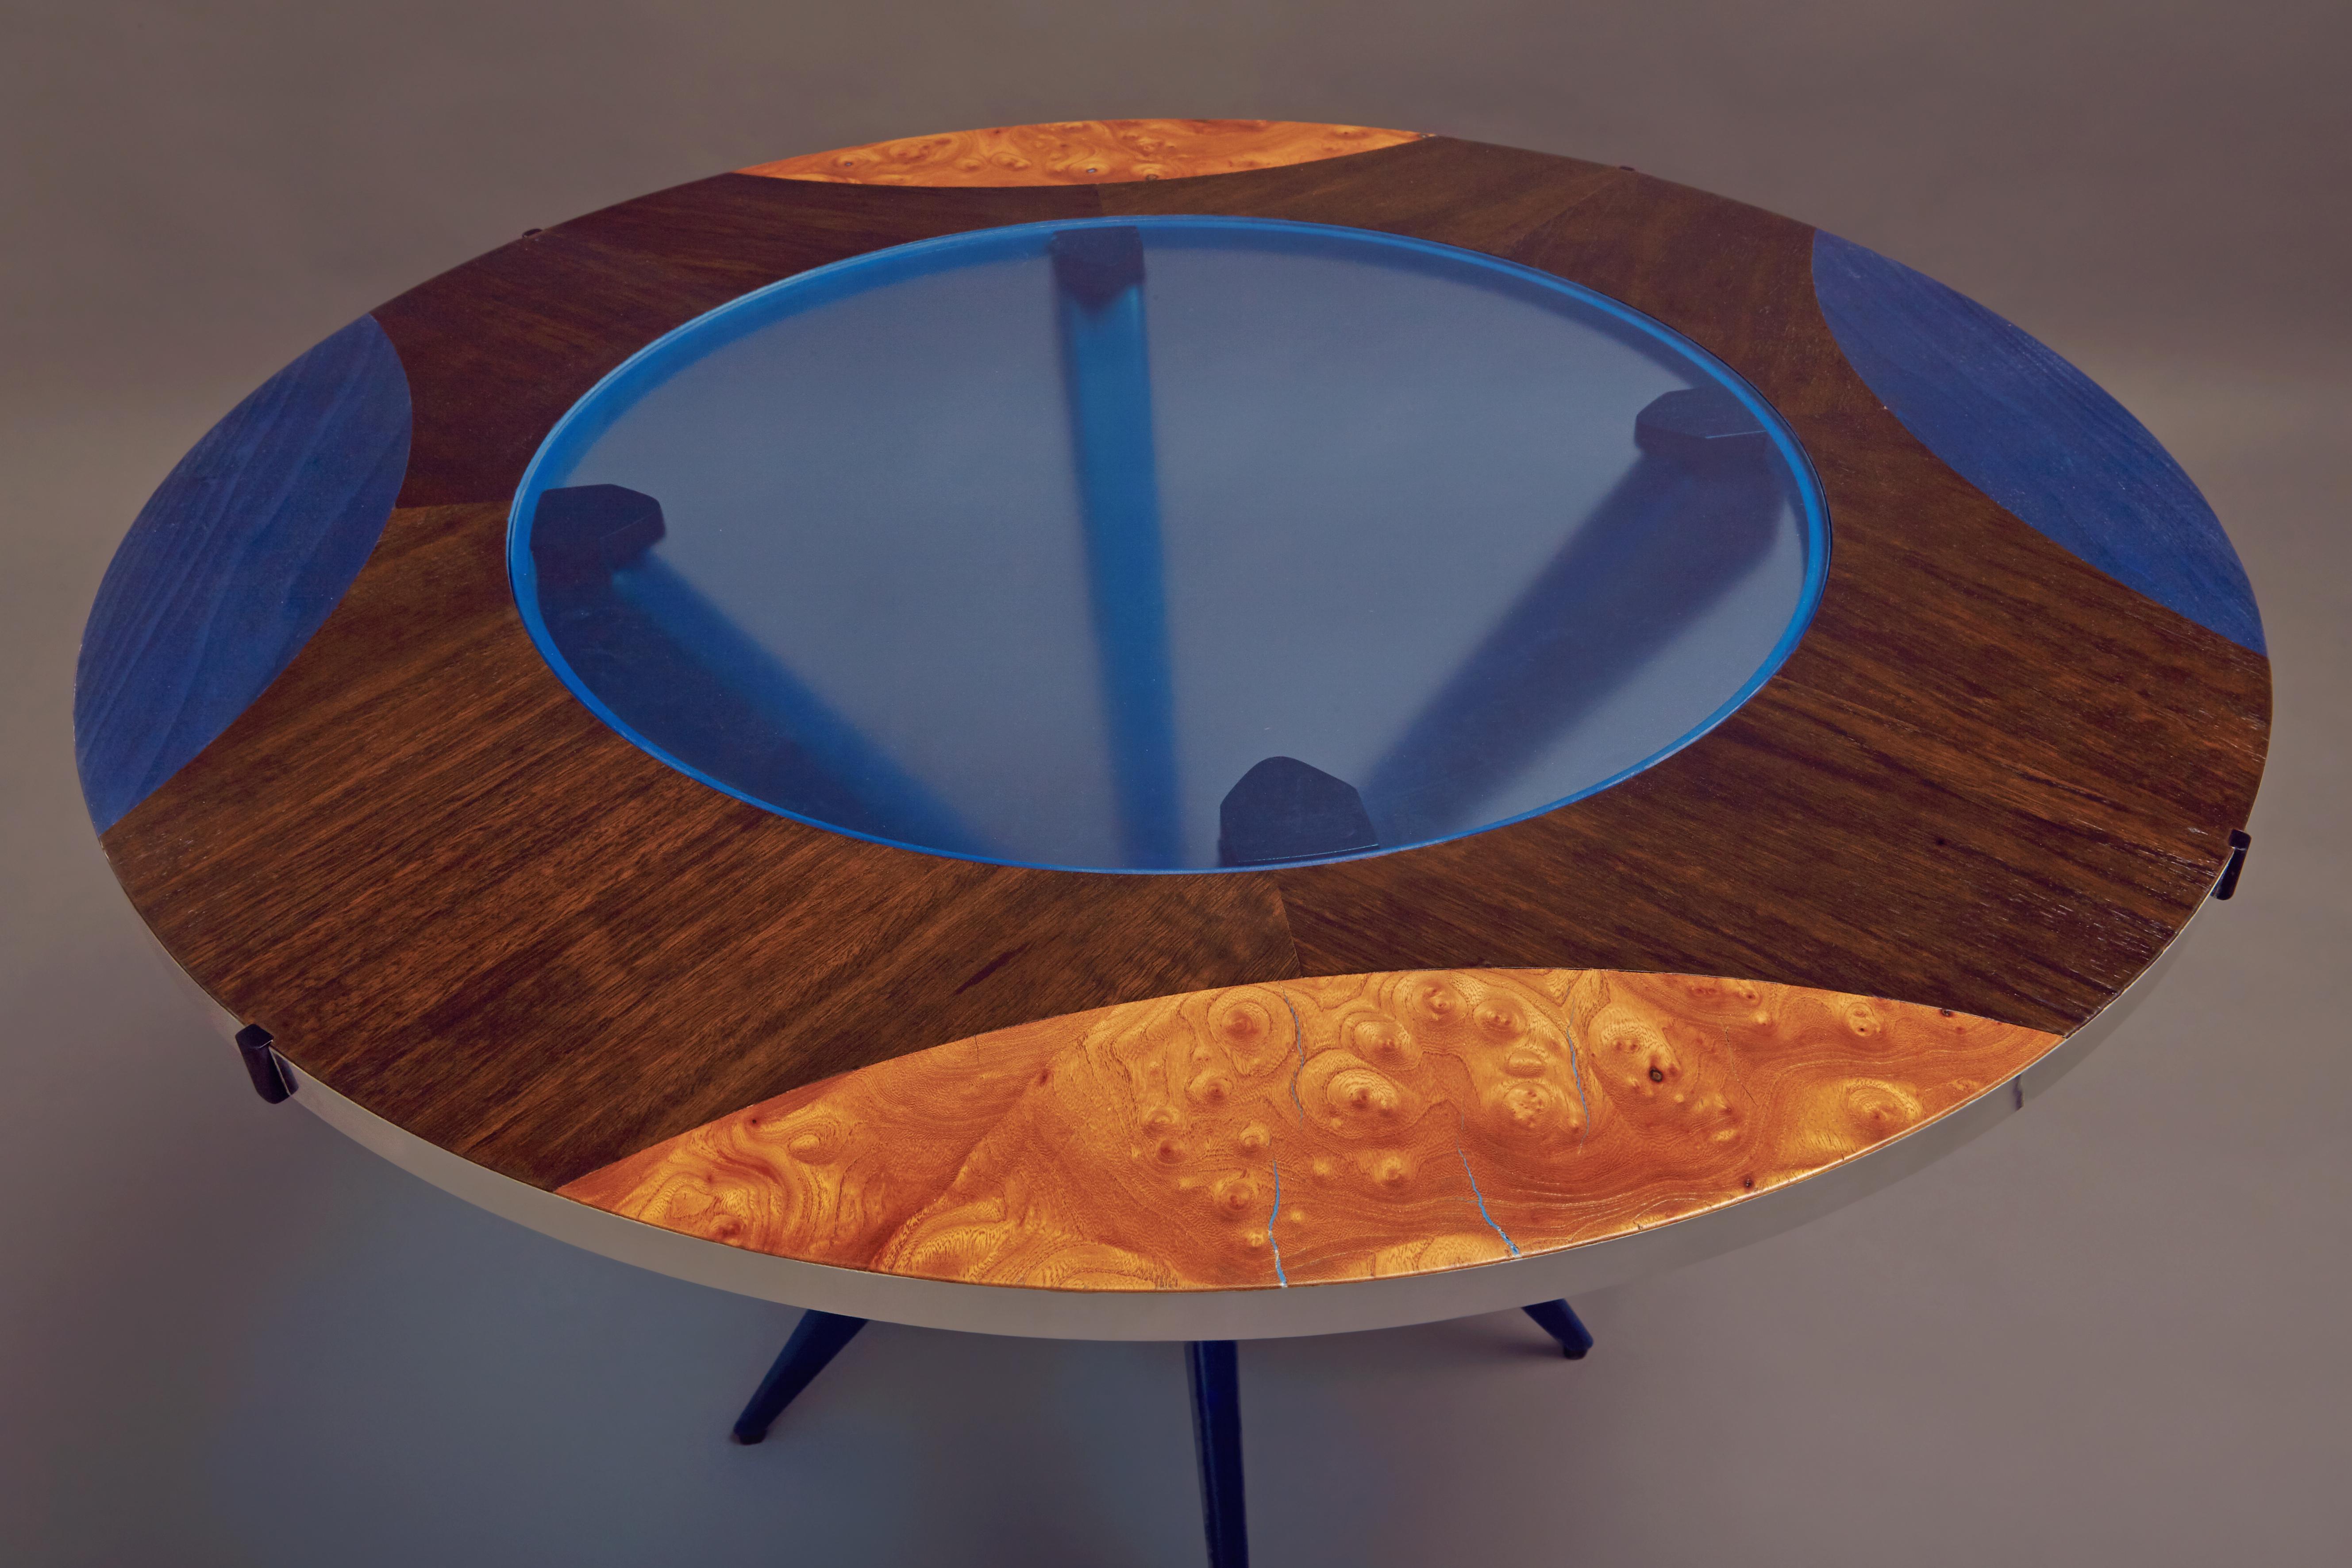 Cocktail table in veneered smoked eucalyptus with dyed blue inlays mixed with olive radica, light blue glass. Aluminum ring.
The base is in solid hand painted blue


Suprematism is an art movement focused on basic geometric forms, such as